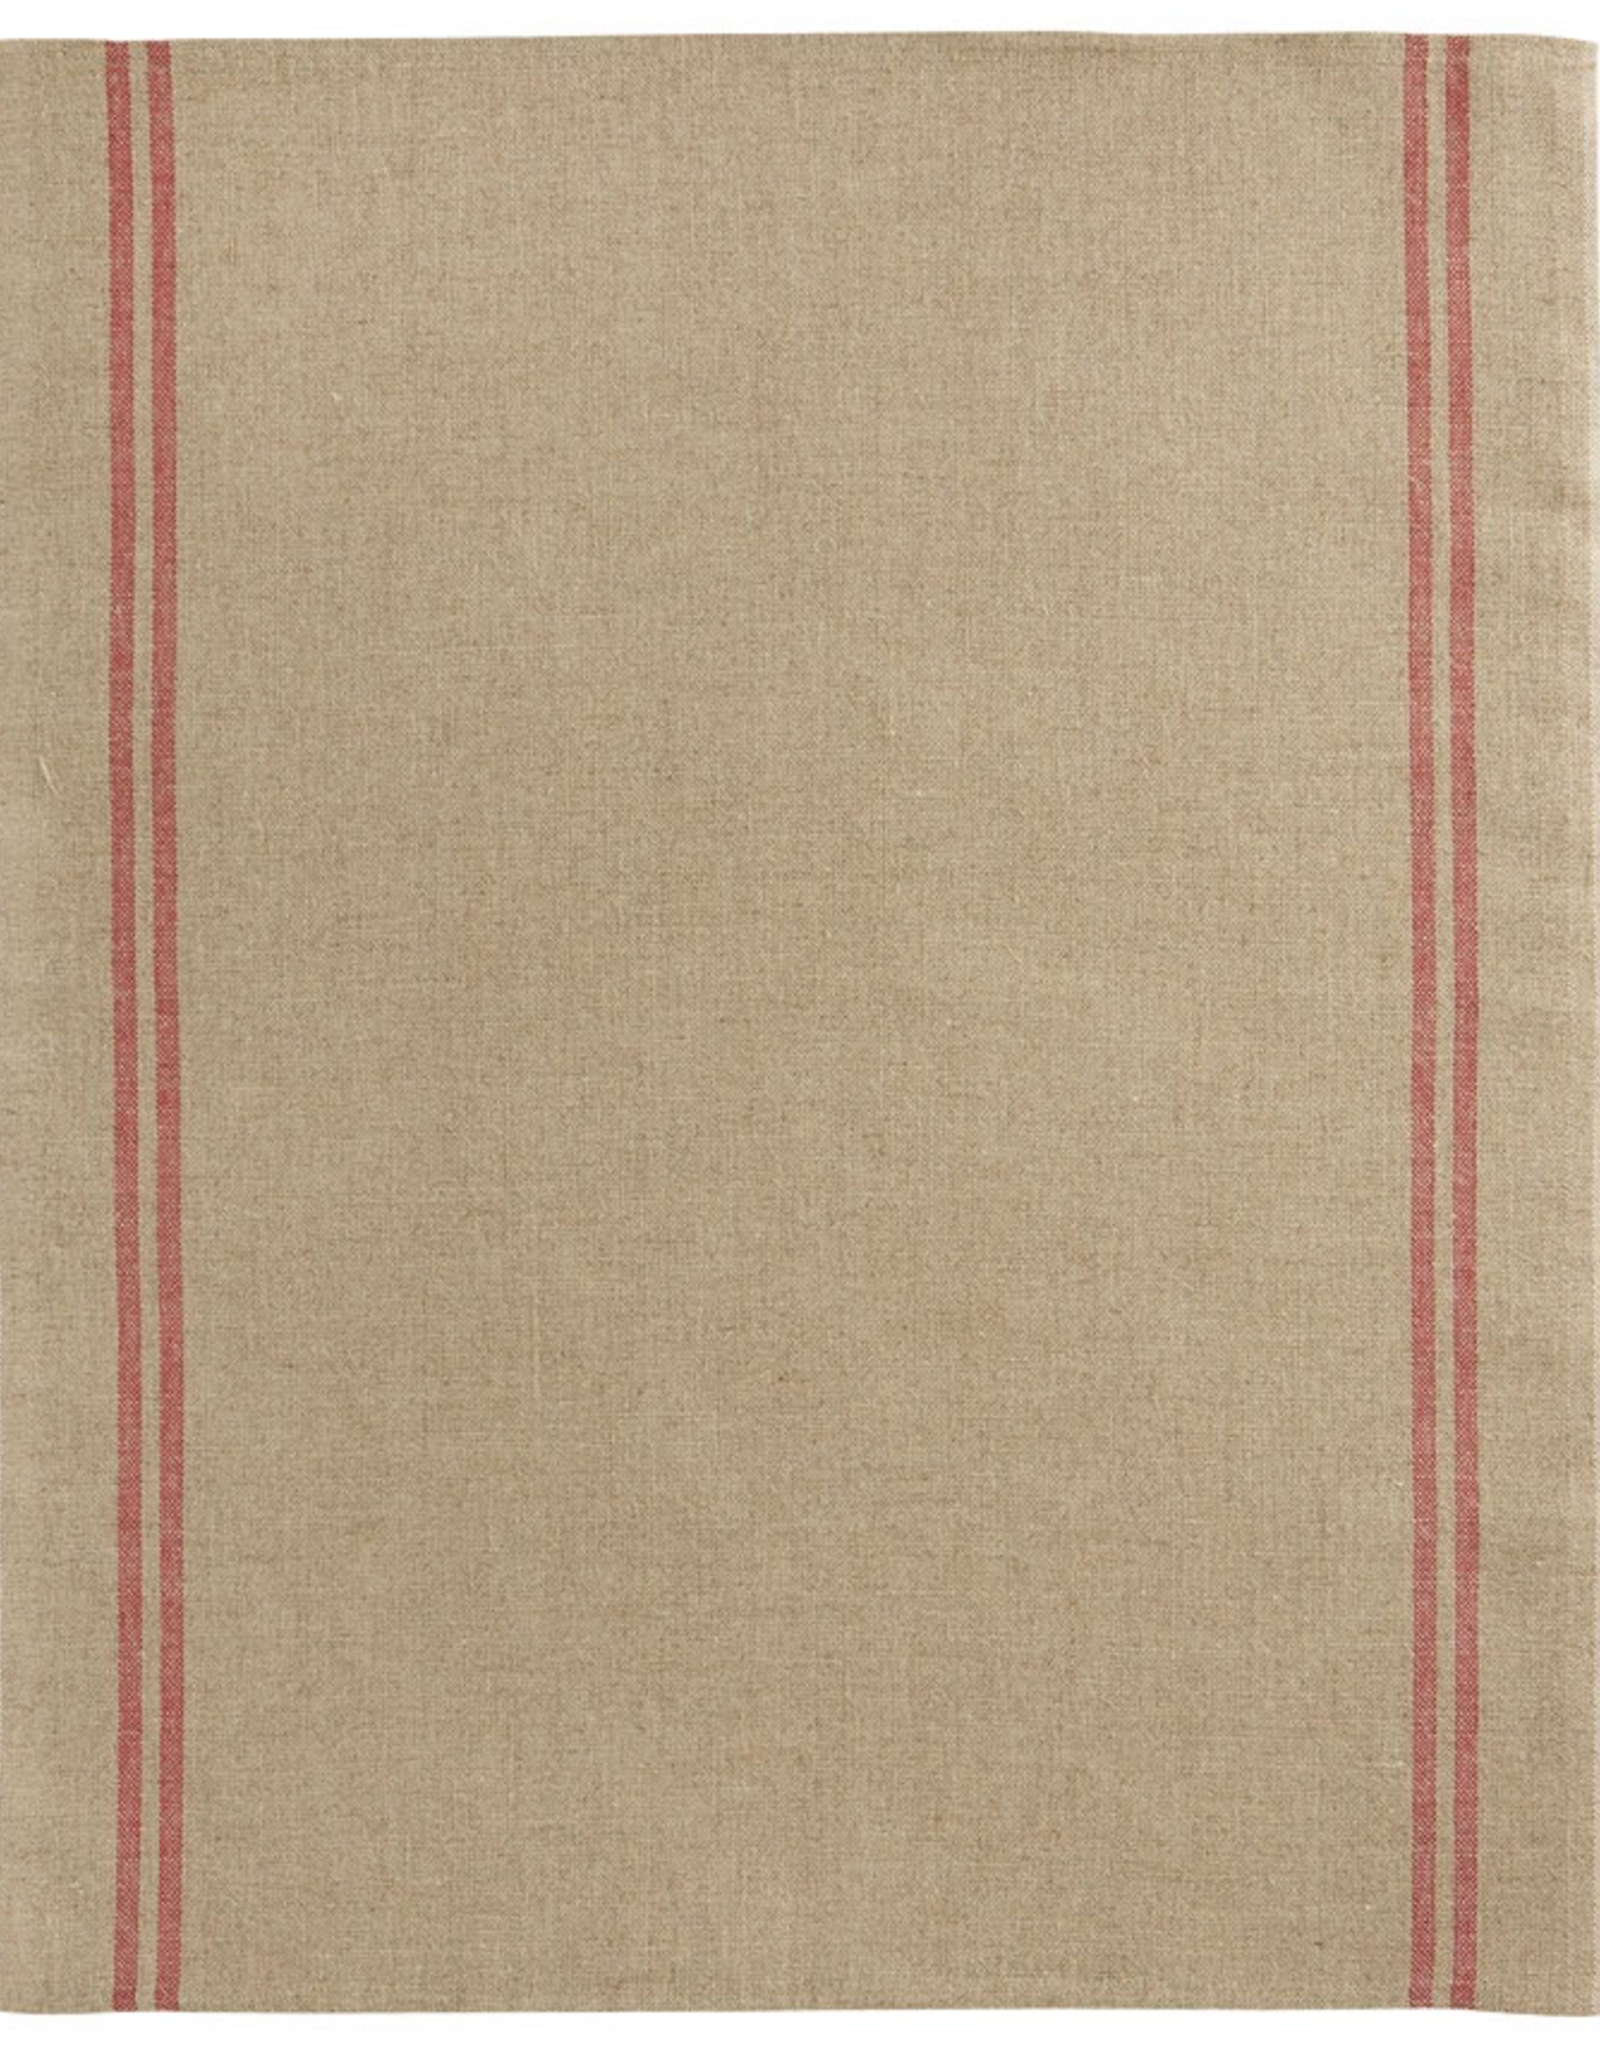 Country Natural with Red Stripe Washed Linen Tea Towel